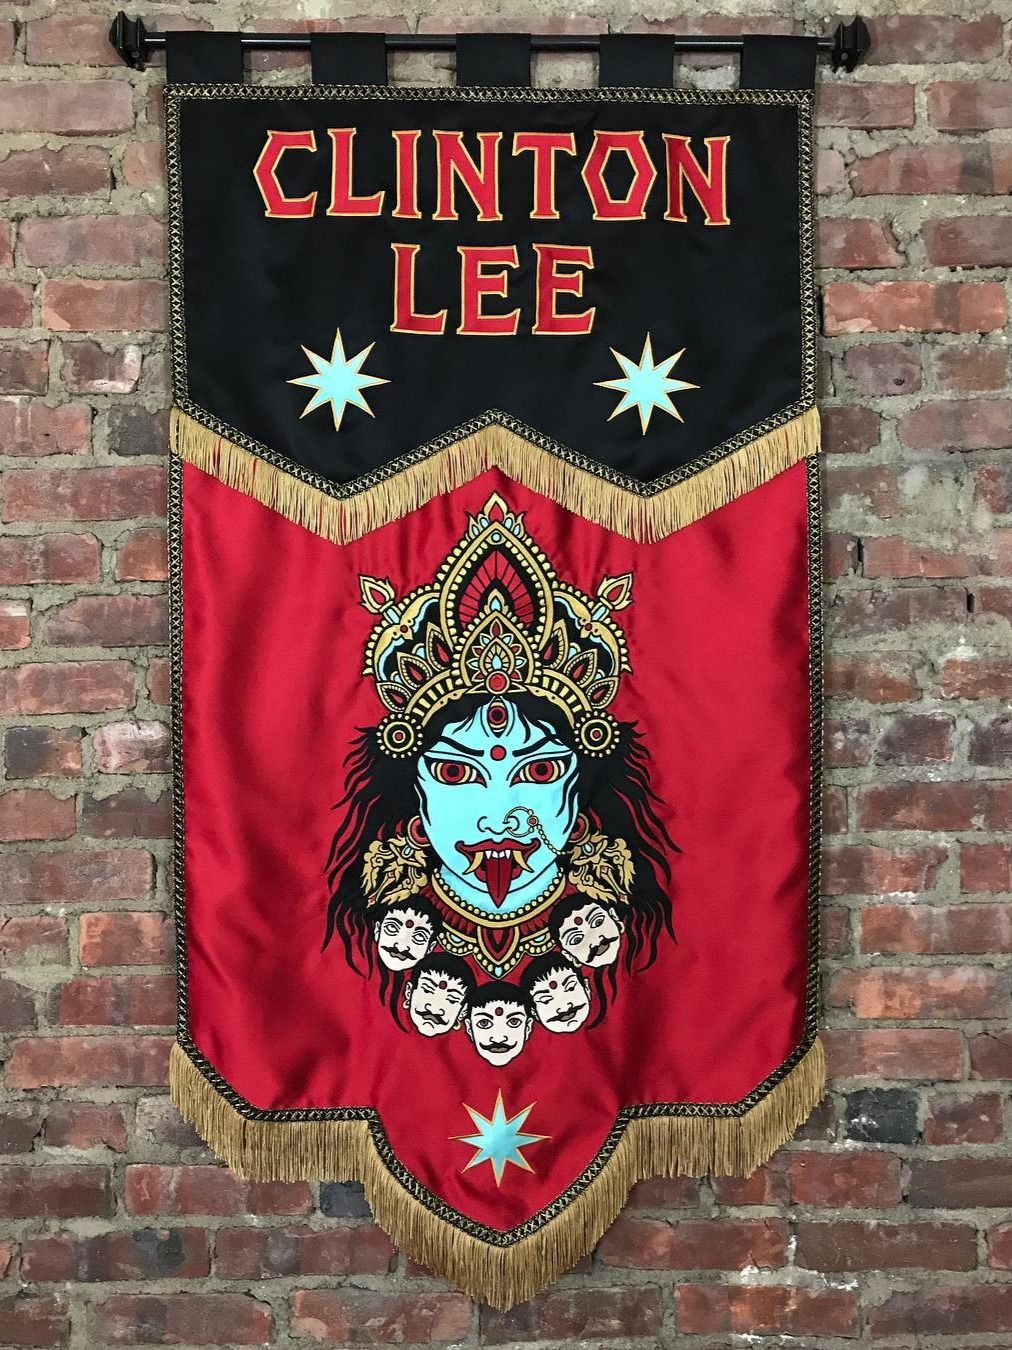 Oxford Pennant  Custom banners for Gypsy Rose Tattoo Convention game  strong  Facebook